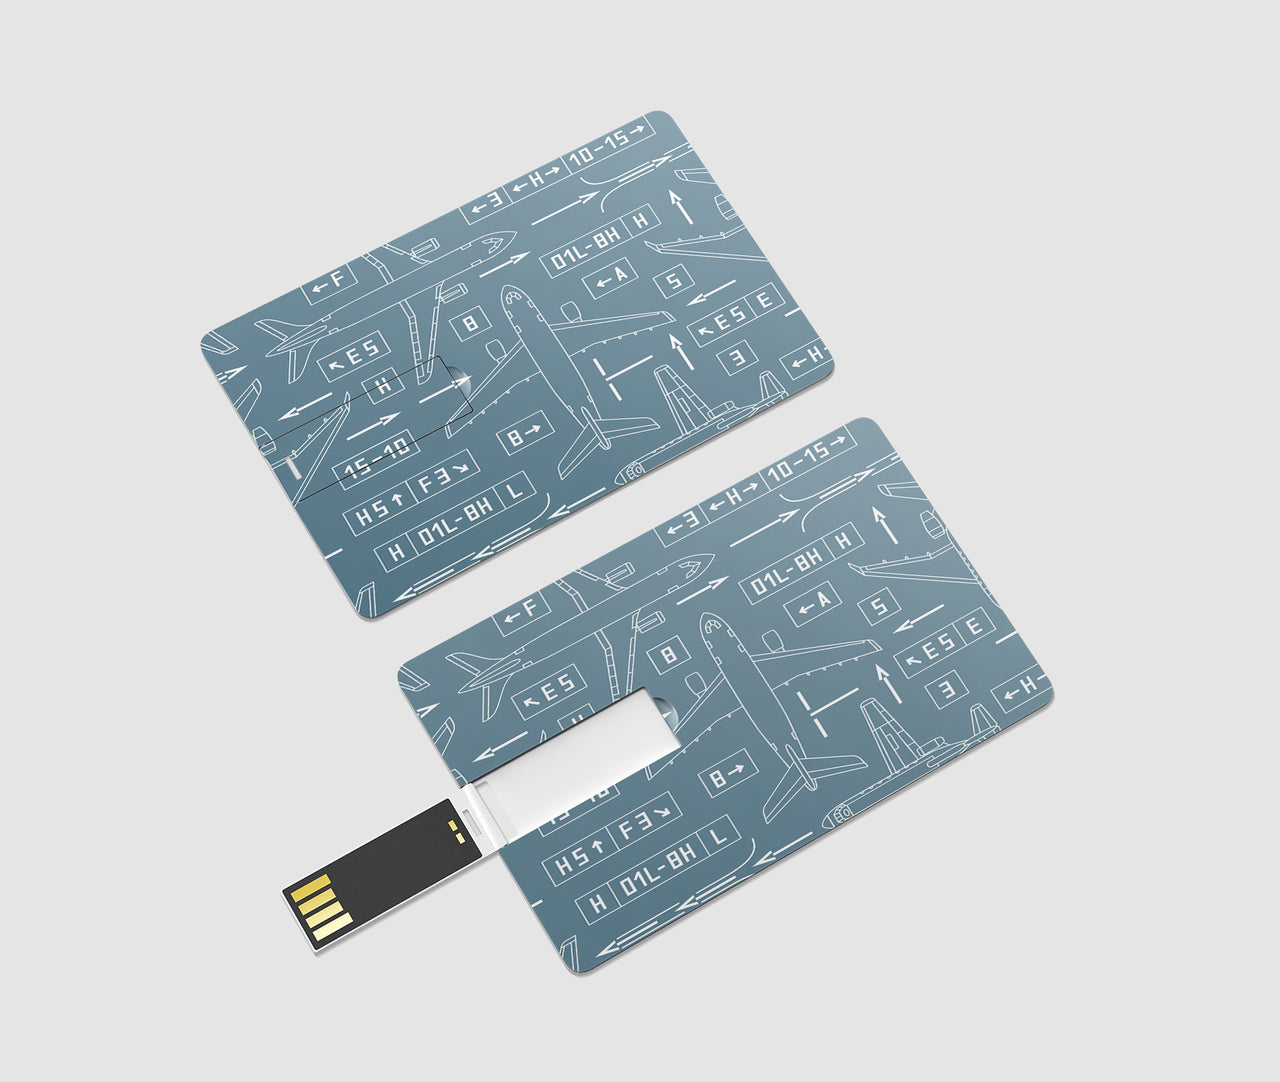 Jet Planes & Airport Signs Designed USB Cards